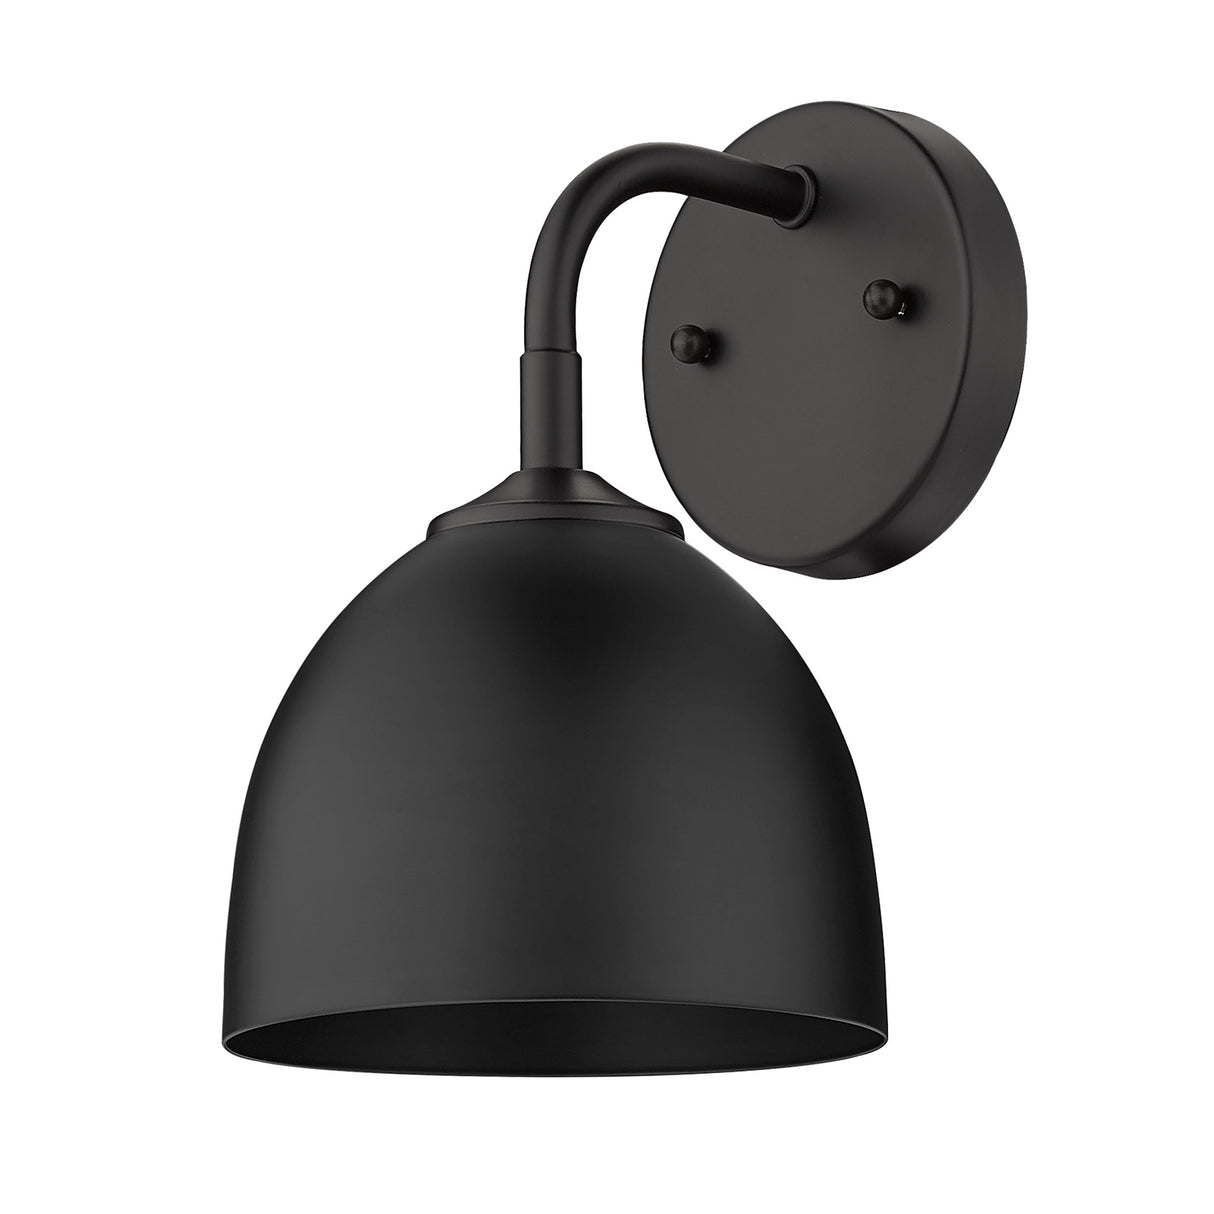 Zoey 1-Light Wall Sconce in Matte Black with Matte Black Shade